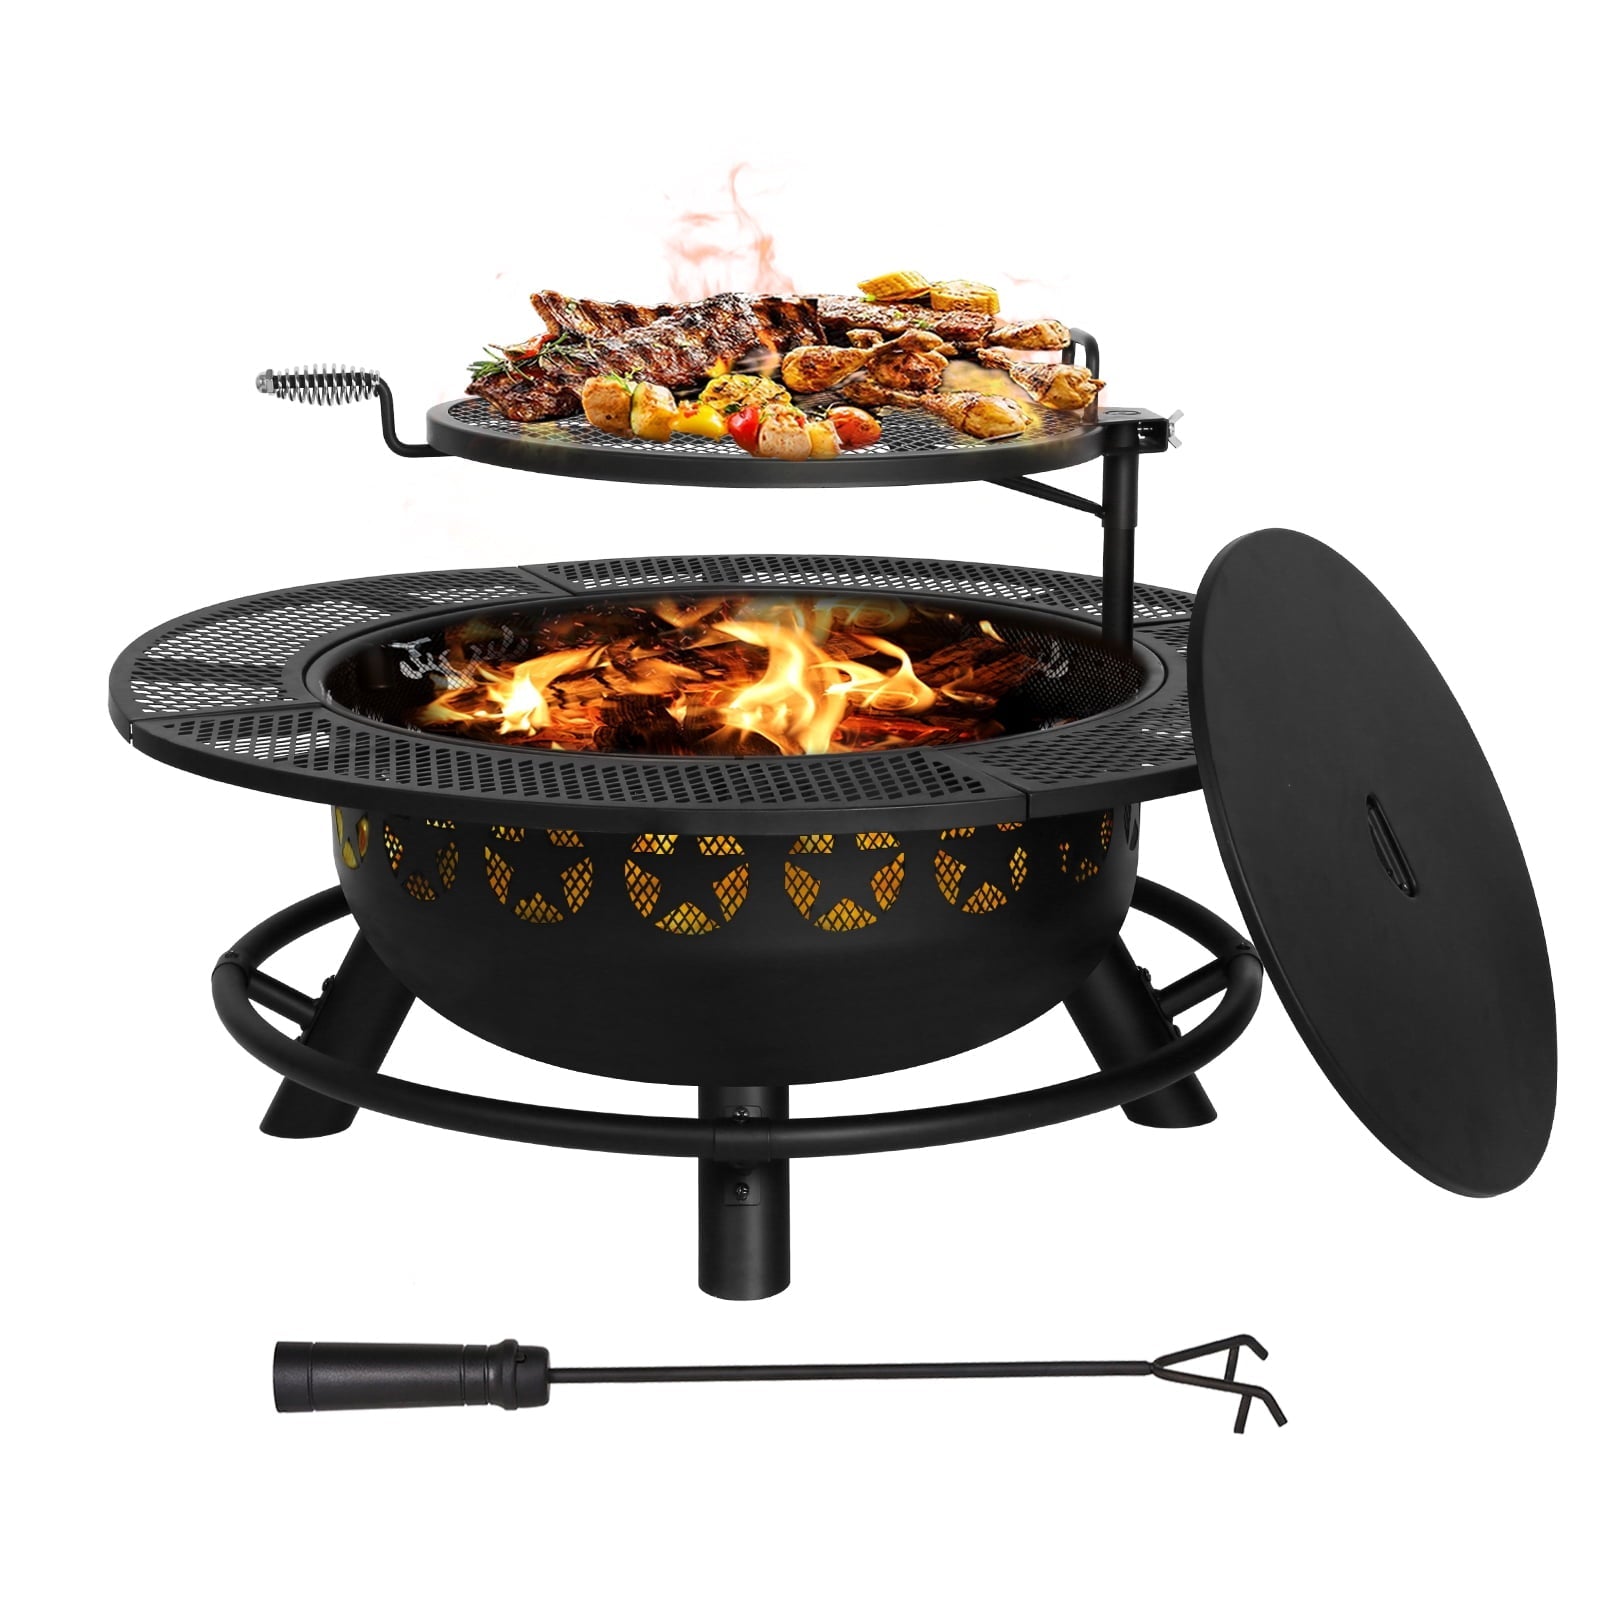 Hykolity 35 Inch Fire Pit with Cooking Grate & Charcoal Pan, Outdoor Wood Burning BBQ Grill